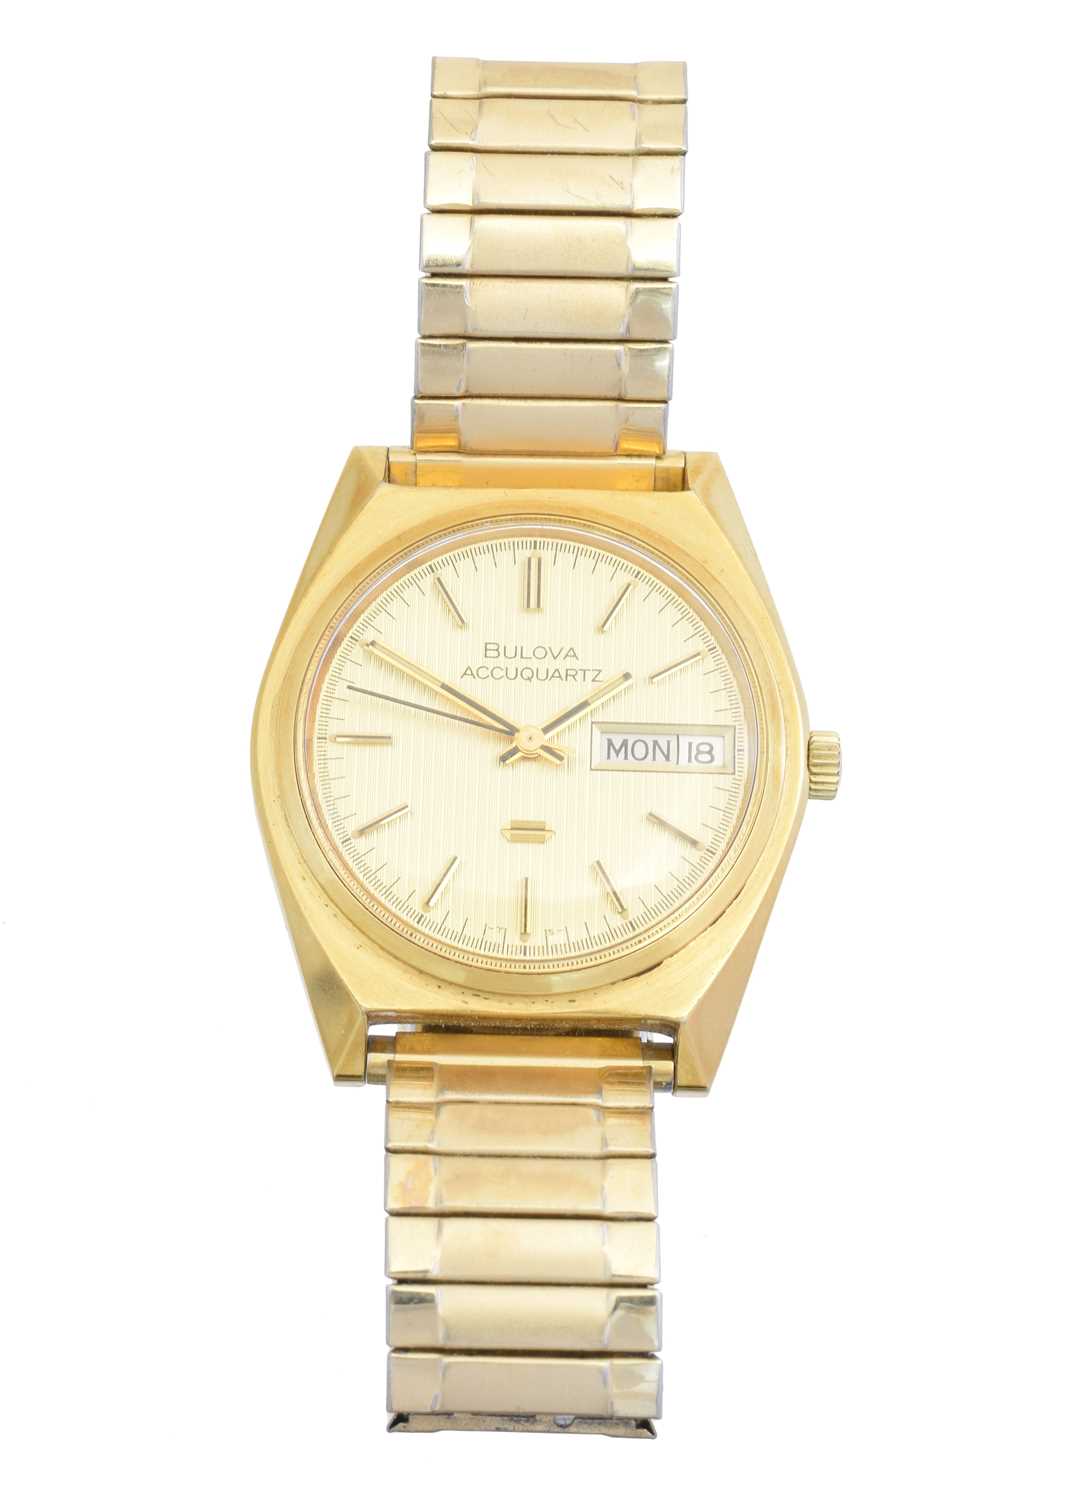 Lot 52 - A gold plated and stainless steel Bulova Accuquartz watch